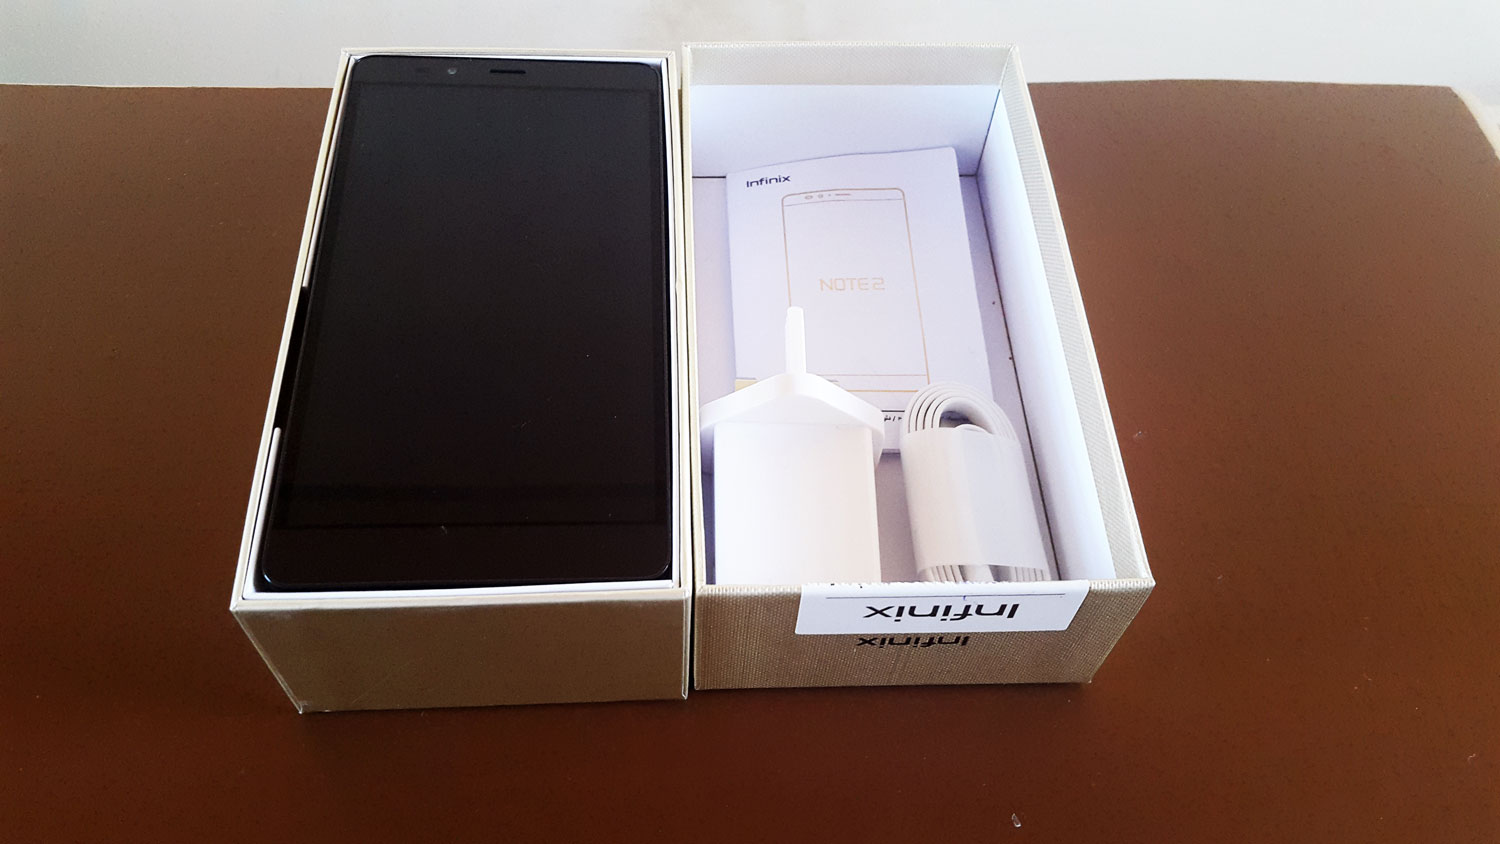 [image] Infinix Note 2-unboxing